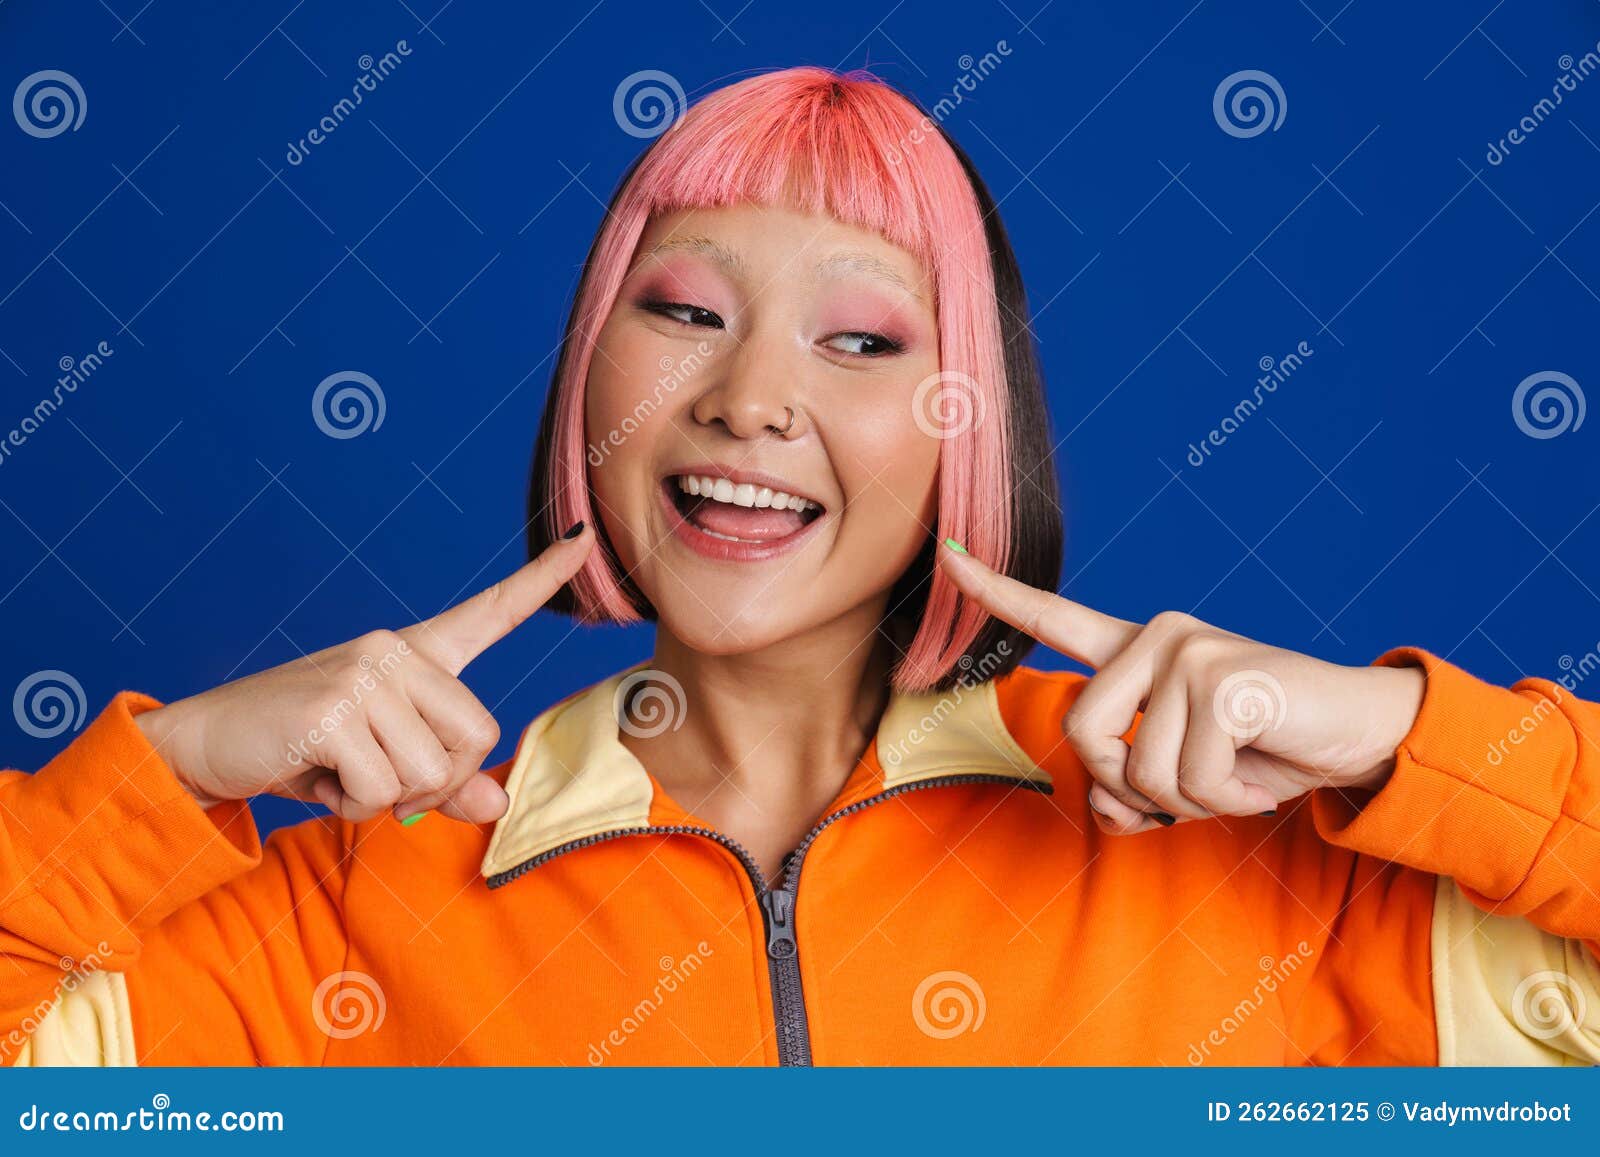 Asian Girl With Pink Hair And Piercing Pointing Fingers At Her Smile Stock Image Image Of